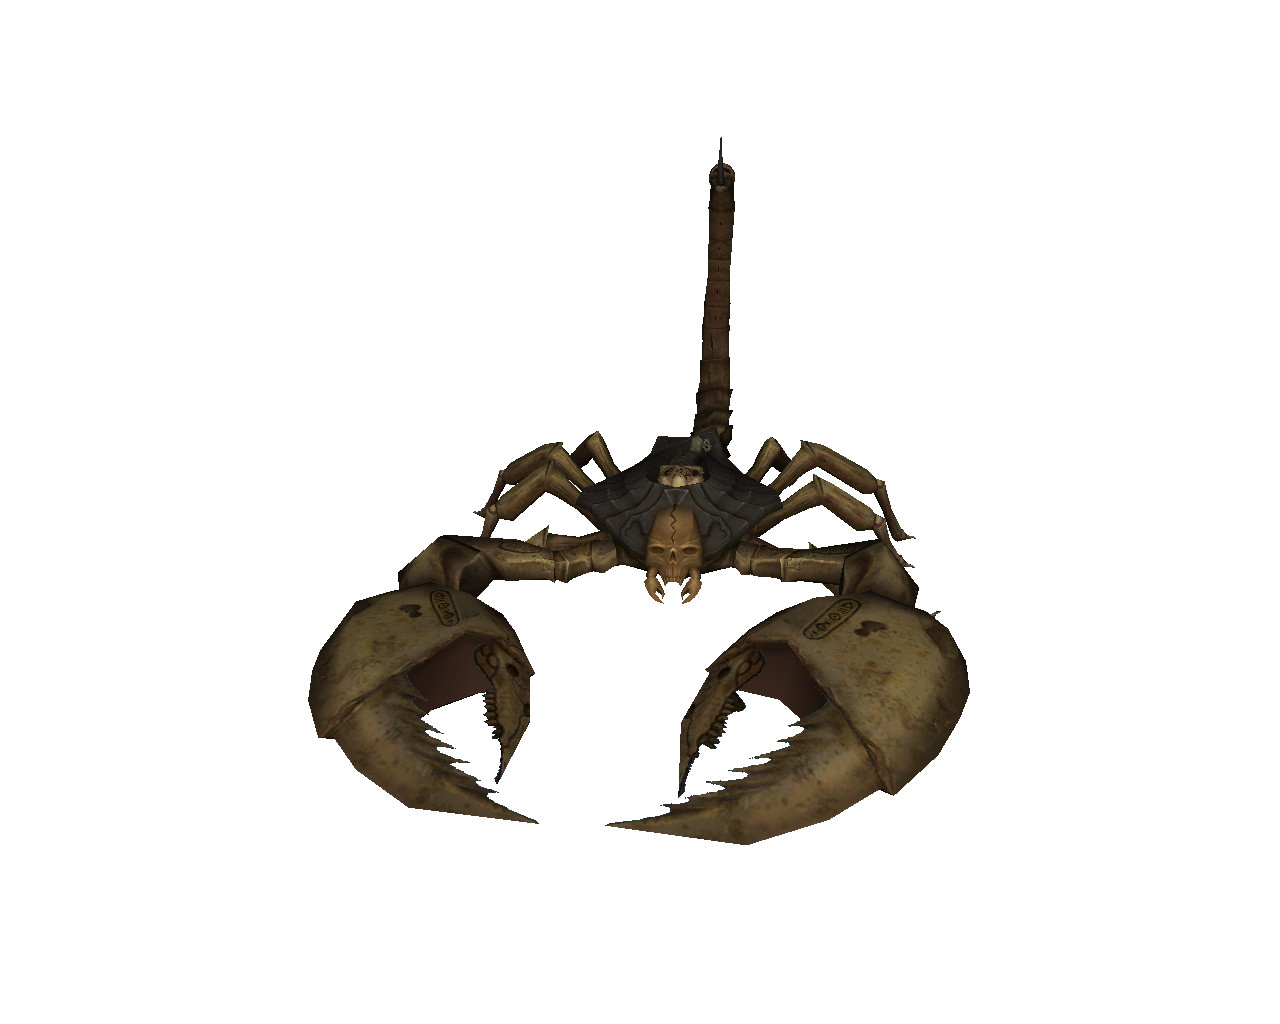 Tomb Scorpion image - Warhammer - The Sundering: Rise of the Witch King mod  for Medieval II: Total War: Kingdoms - ModDB